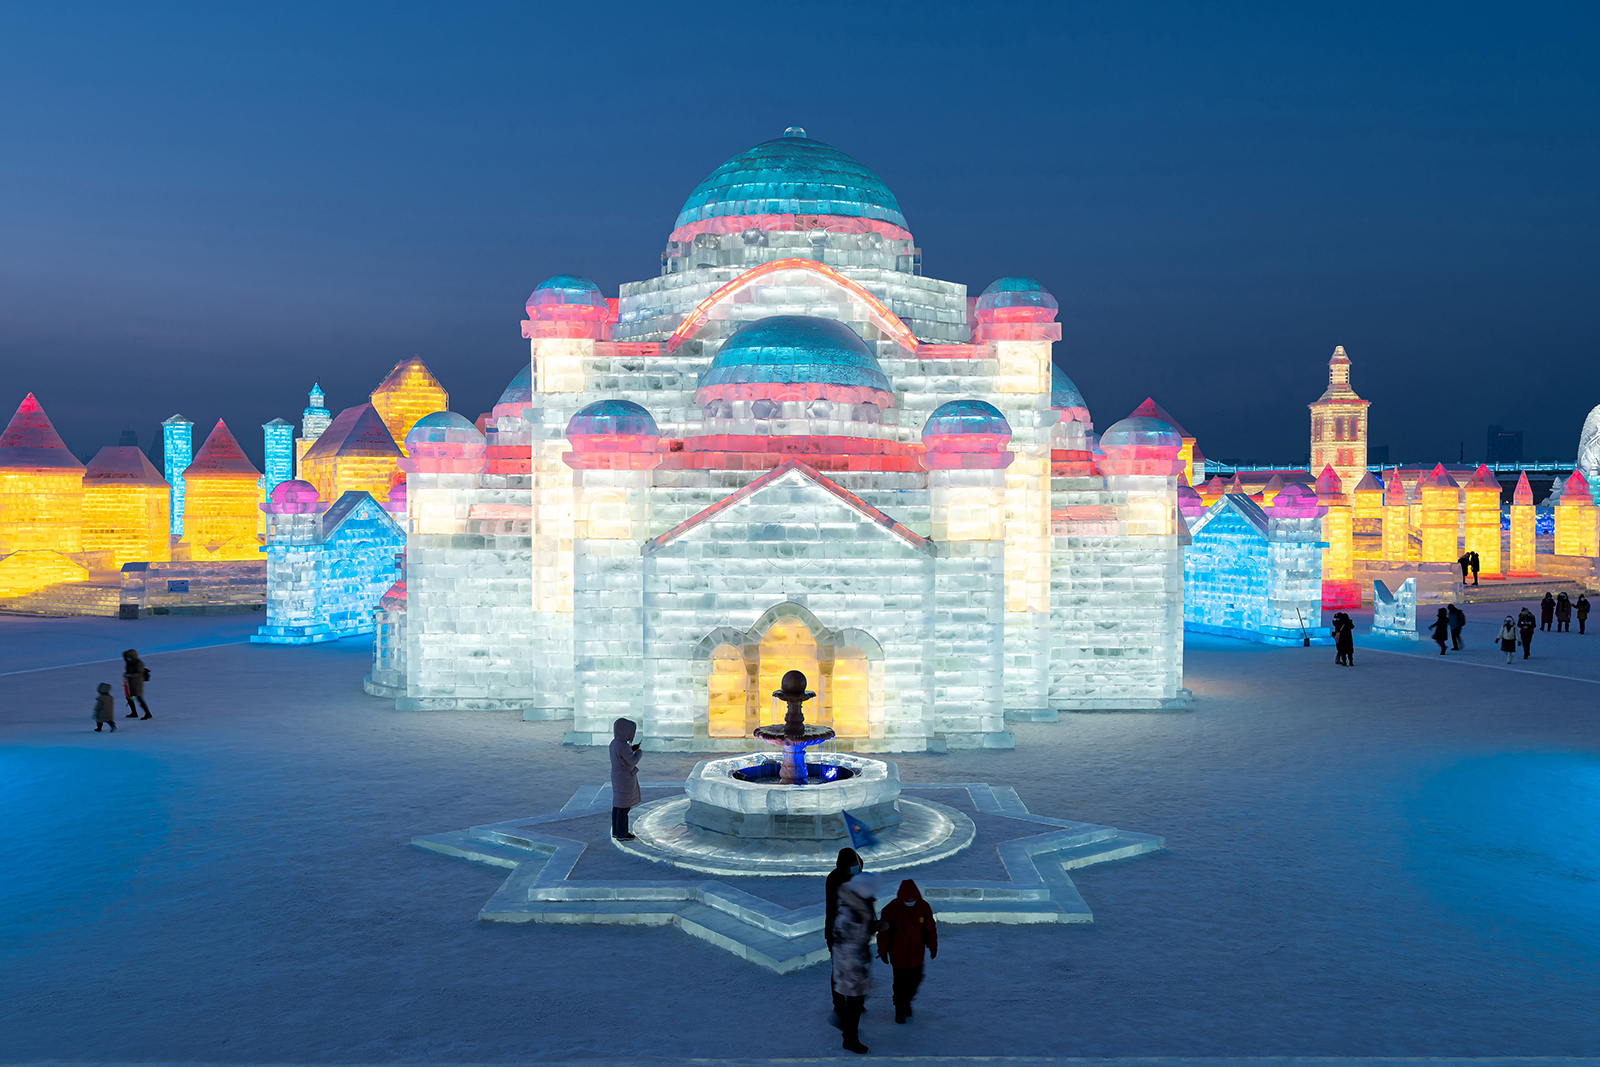 People look at ice sculptures at the Harbin Ice and Snow Festival in Harbin,China, on January 5.